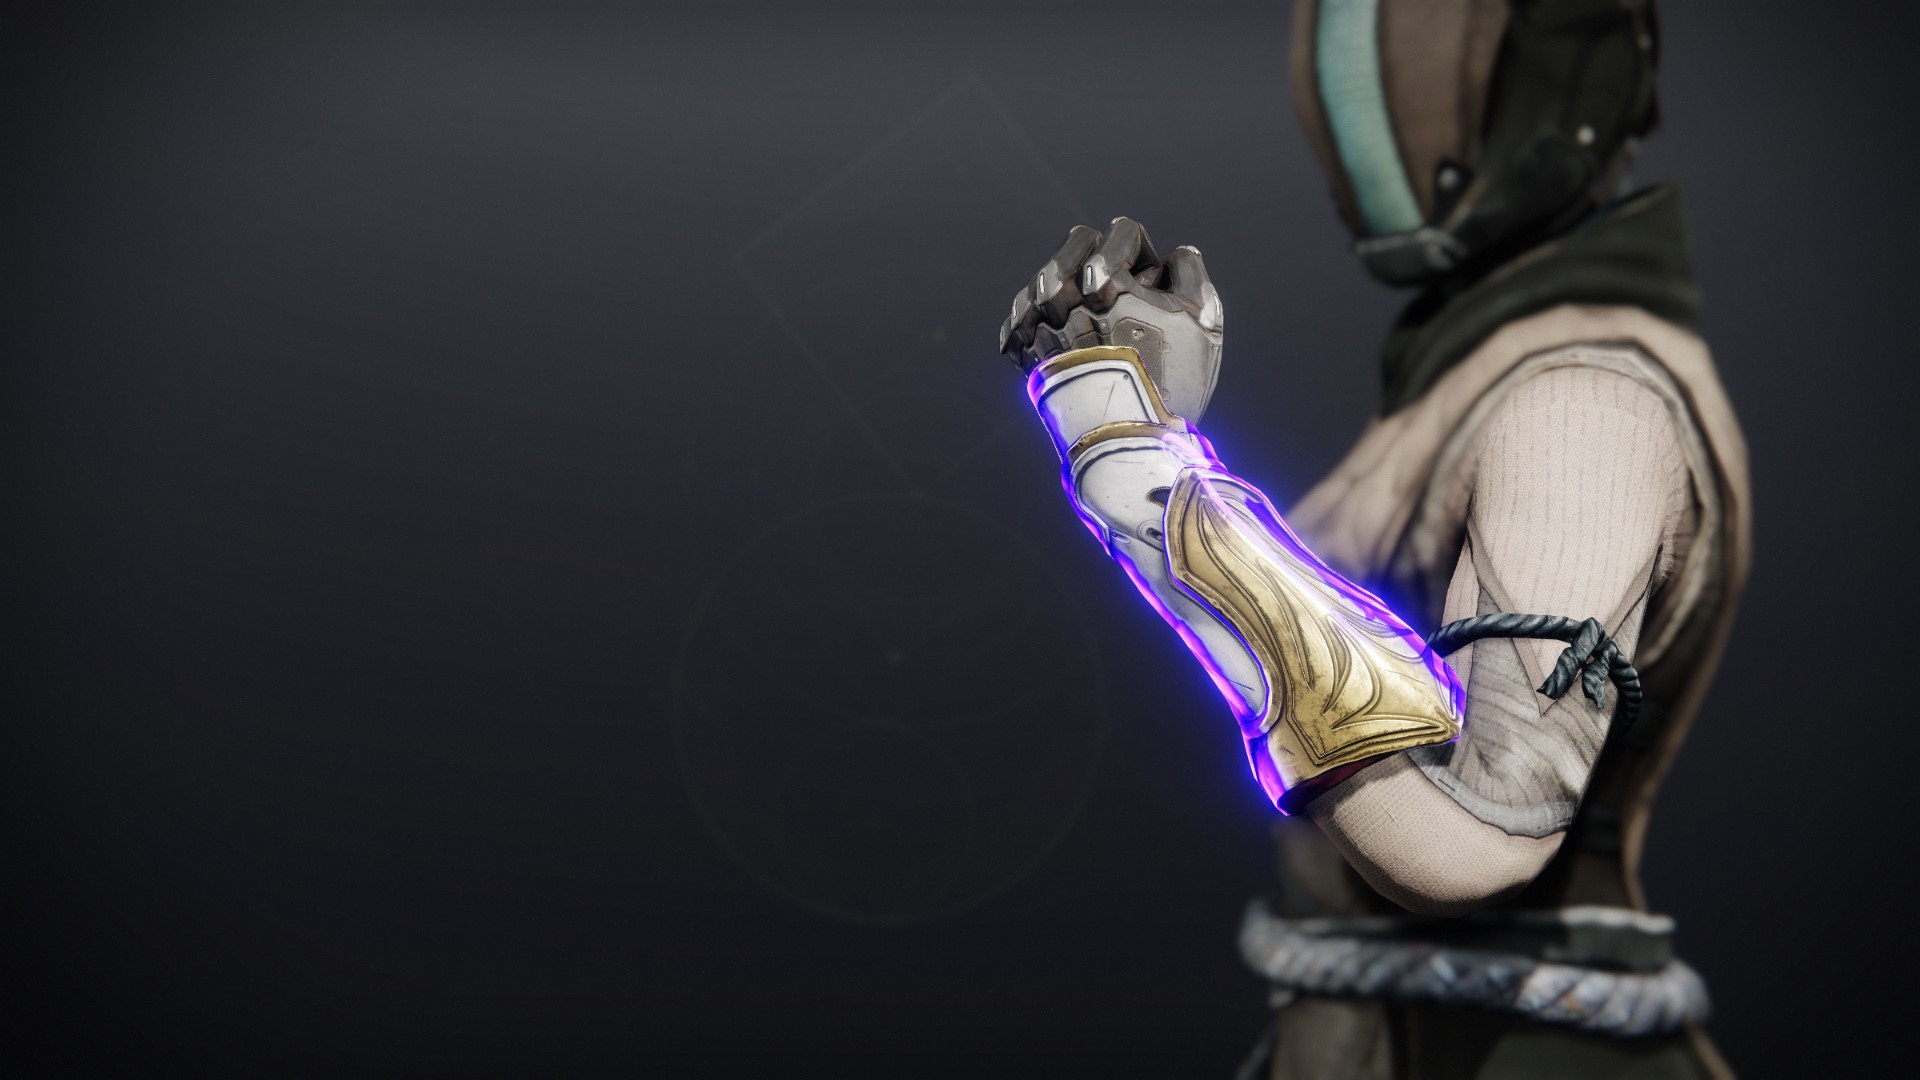 An in-game render of the Candescent Prism Gloves.